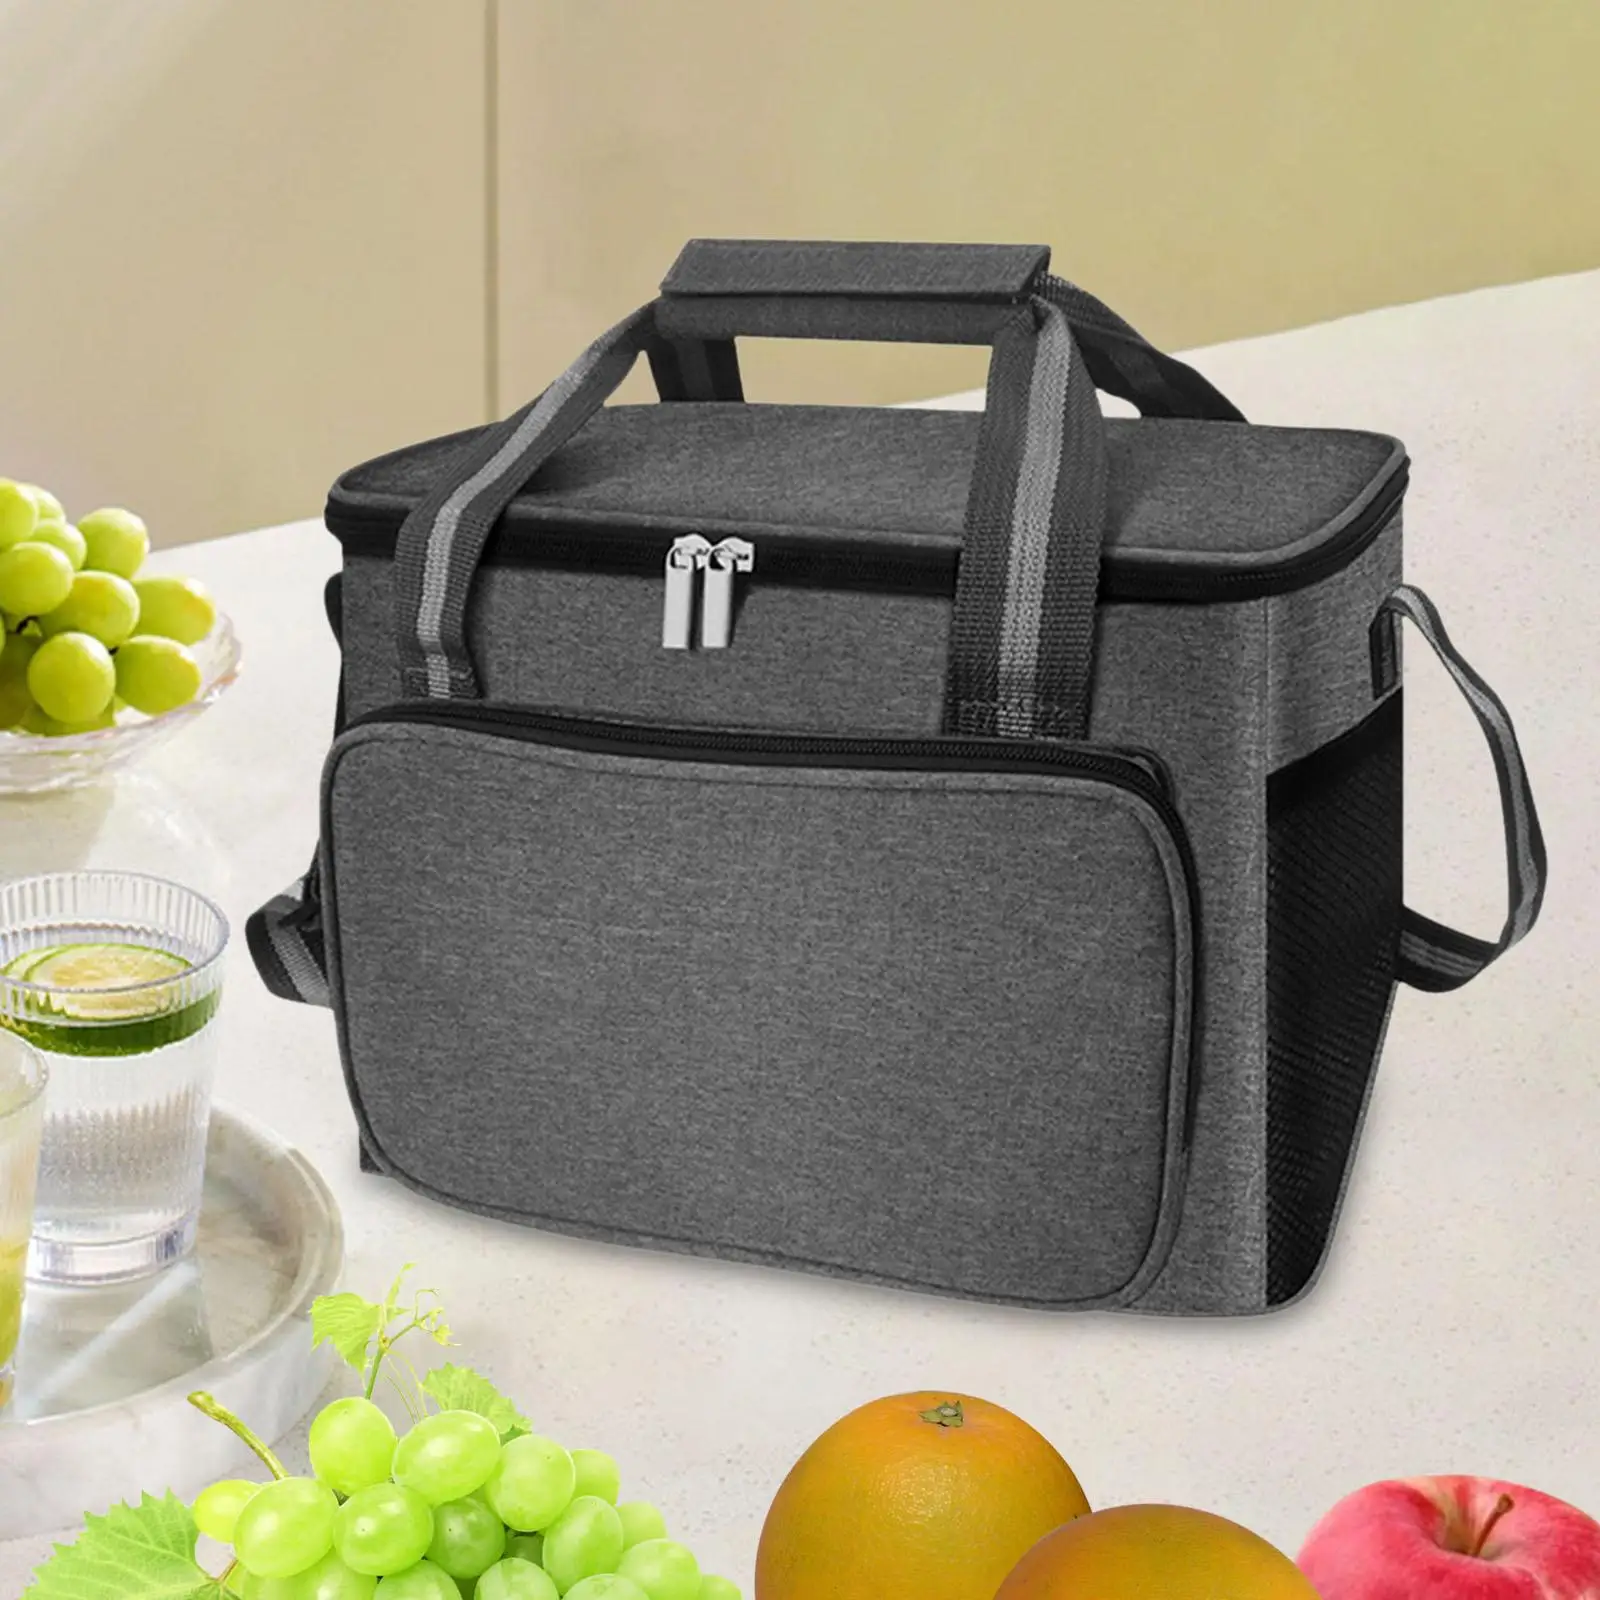 Insulated Lunch Bag Multi Pocket Waterproof Oxford Cloth Zipper Grocery Shopping Bag for Hiking Outdoor Picnic Woman and Man